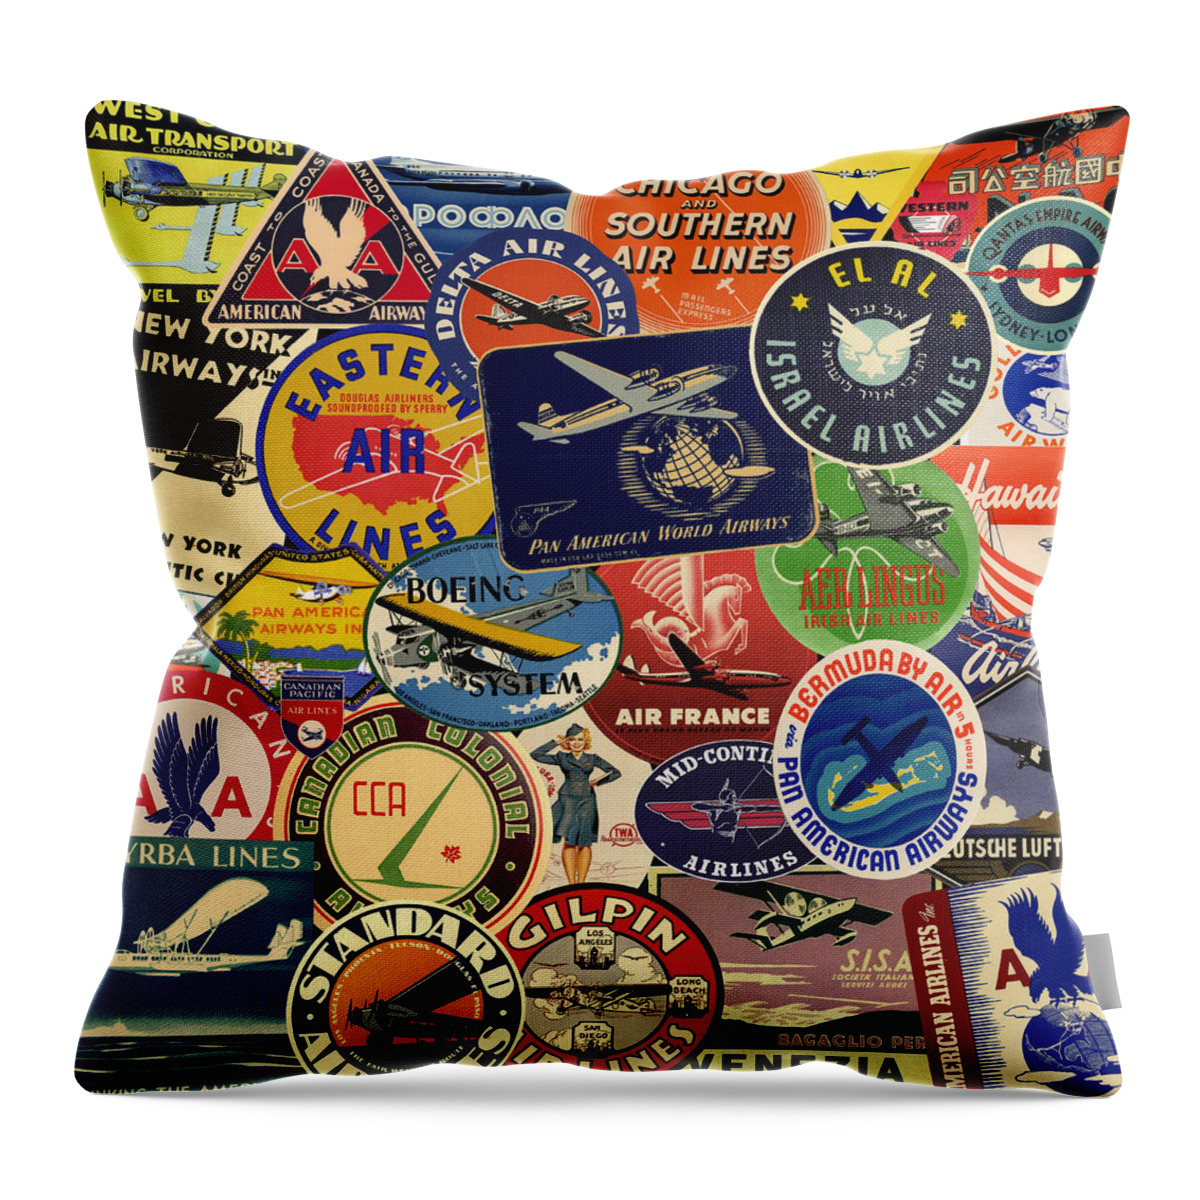 Vintage Luggage Labels.luggage Labels Throw Pillow featuring the photograph Vintage Luggage Labels 1 by Andrew Fare